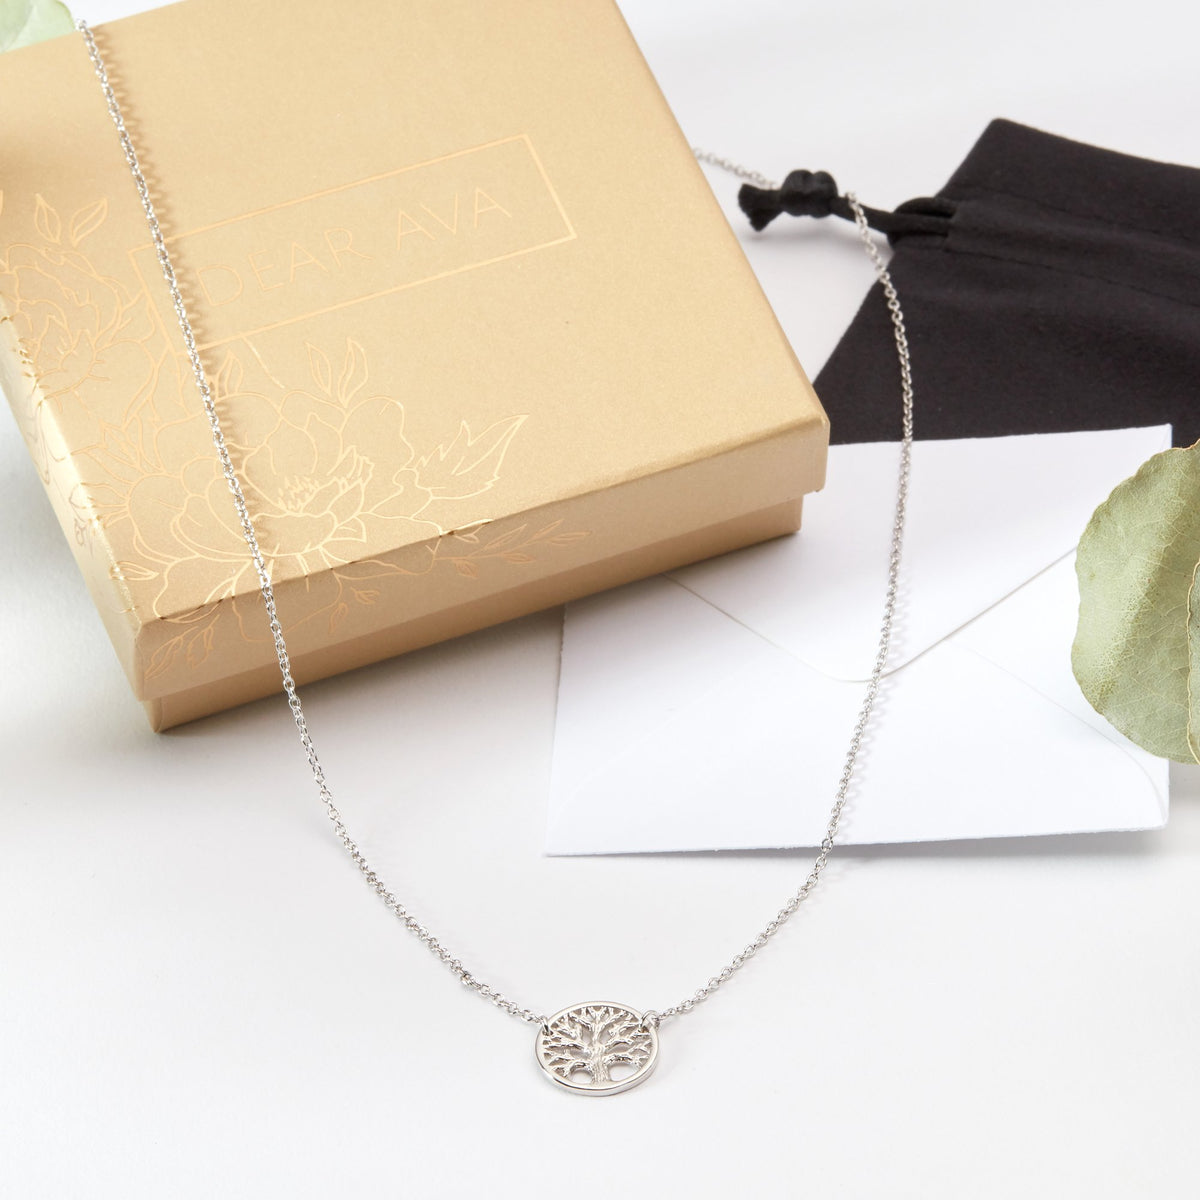 Tree of Life Necklace Gift